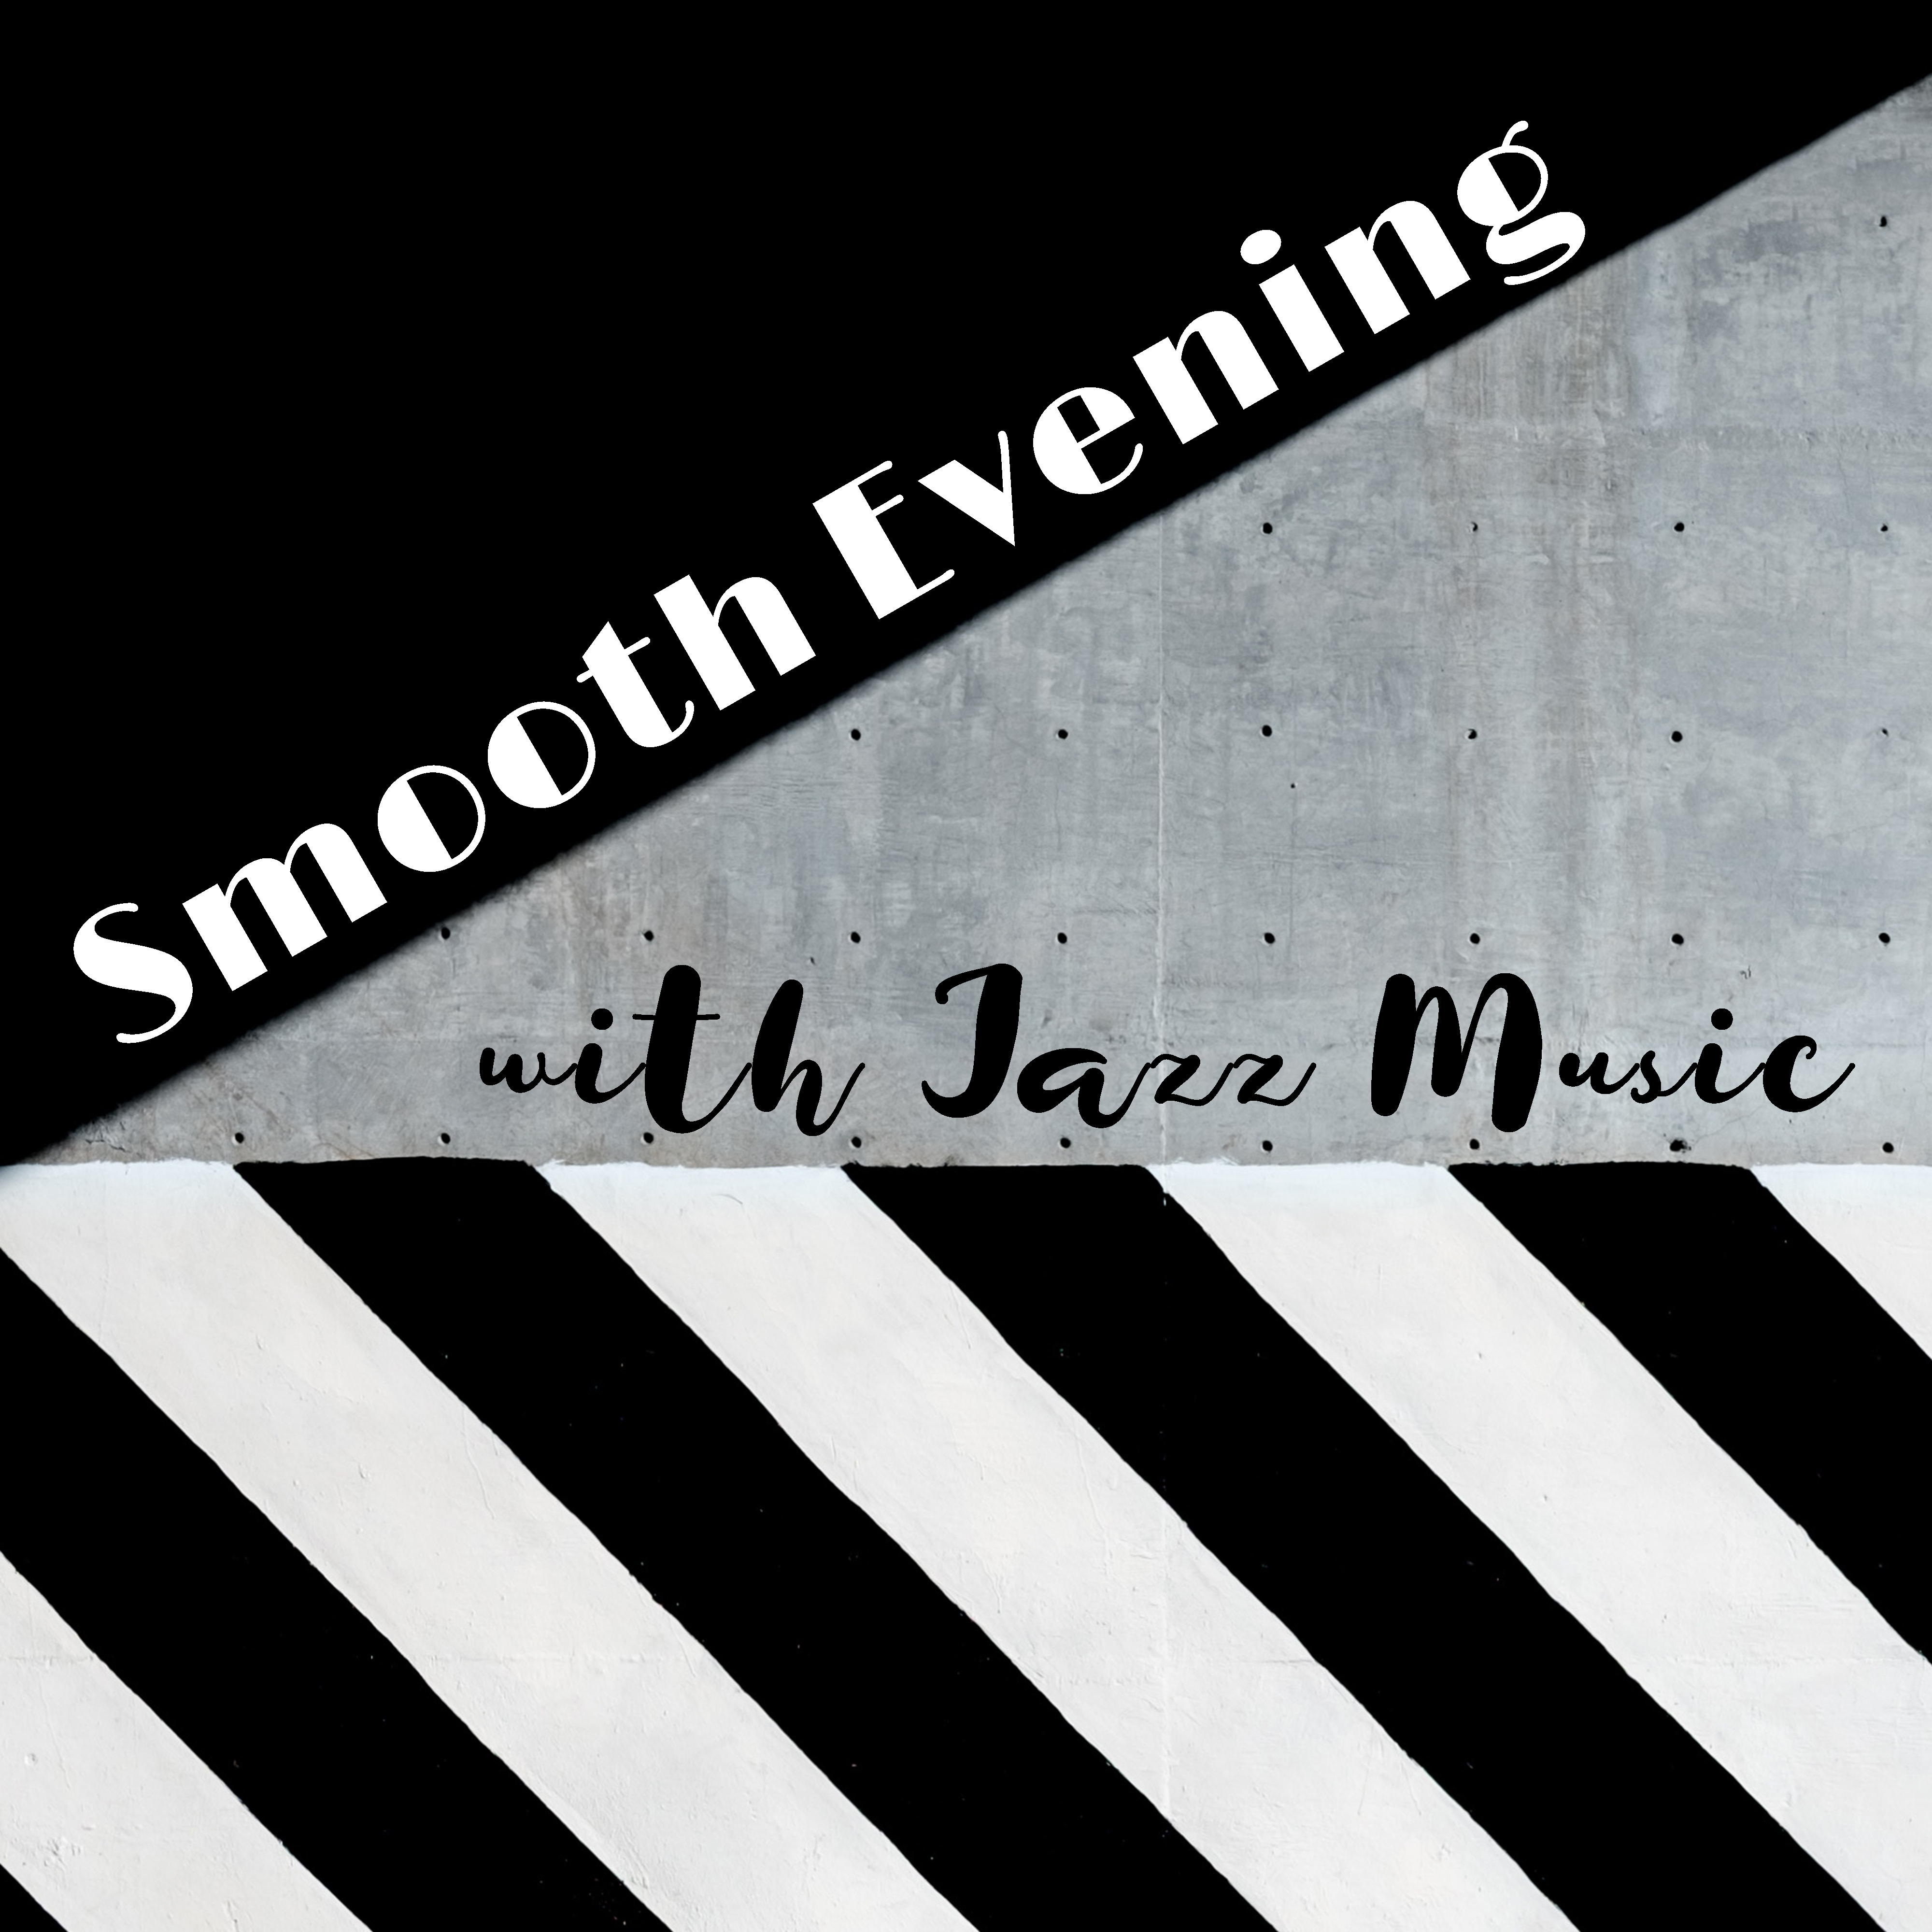 Smooth Evening with Jazz Music